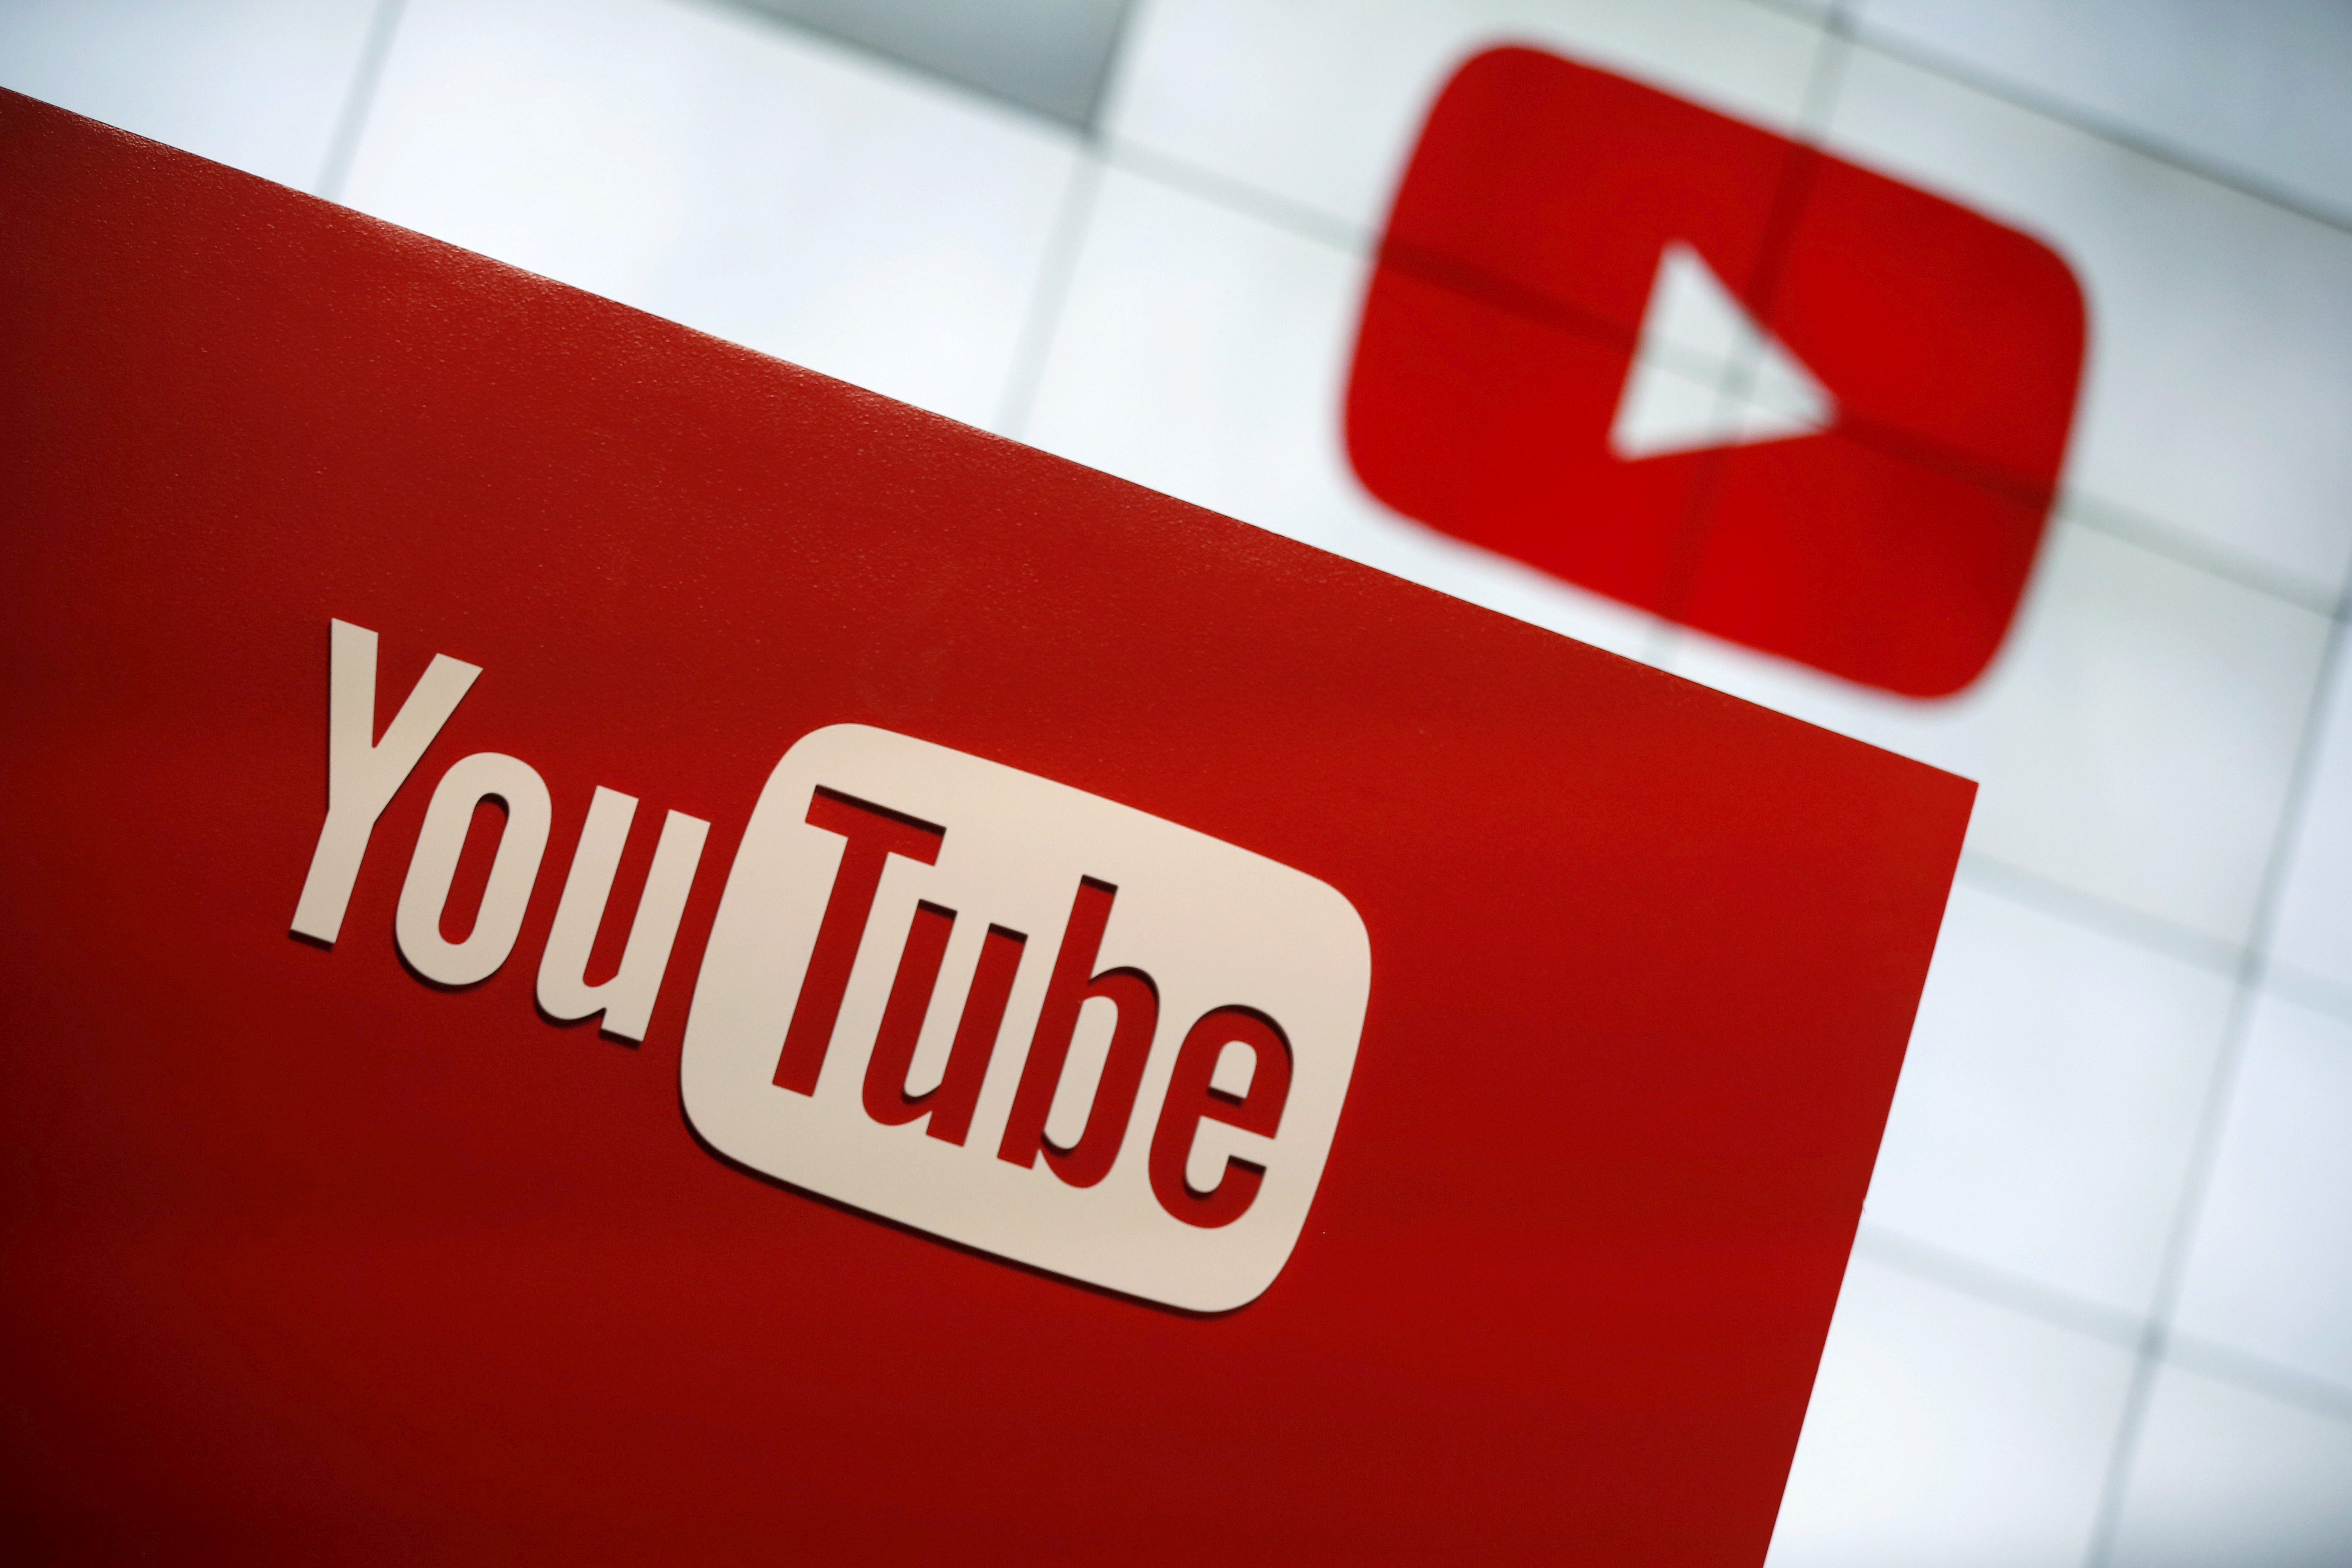 YouTube bans Trump for another week over inauguration violence concerns